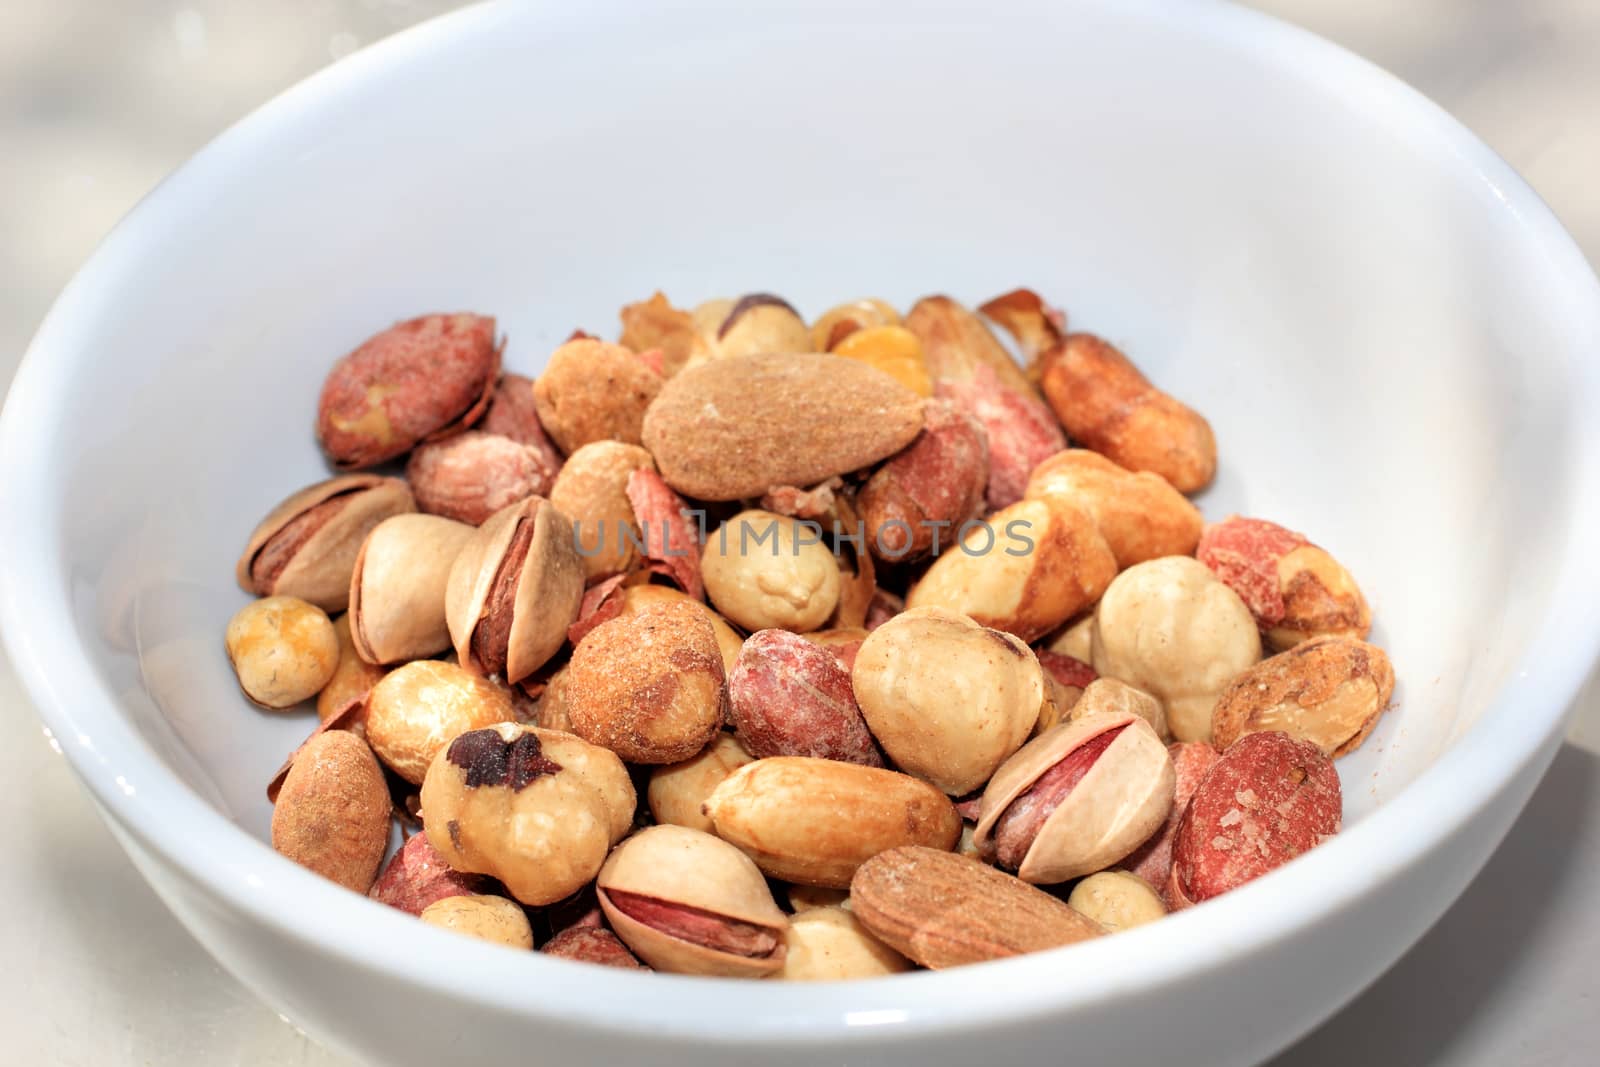 Roasted Nuts in a Bowl by smoxx